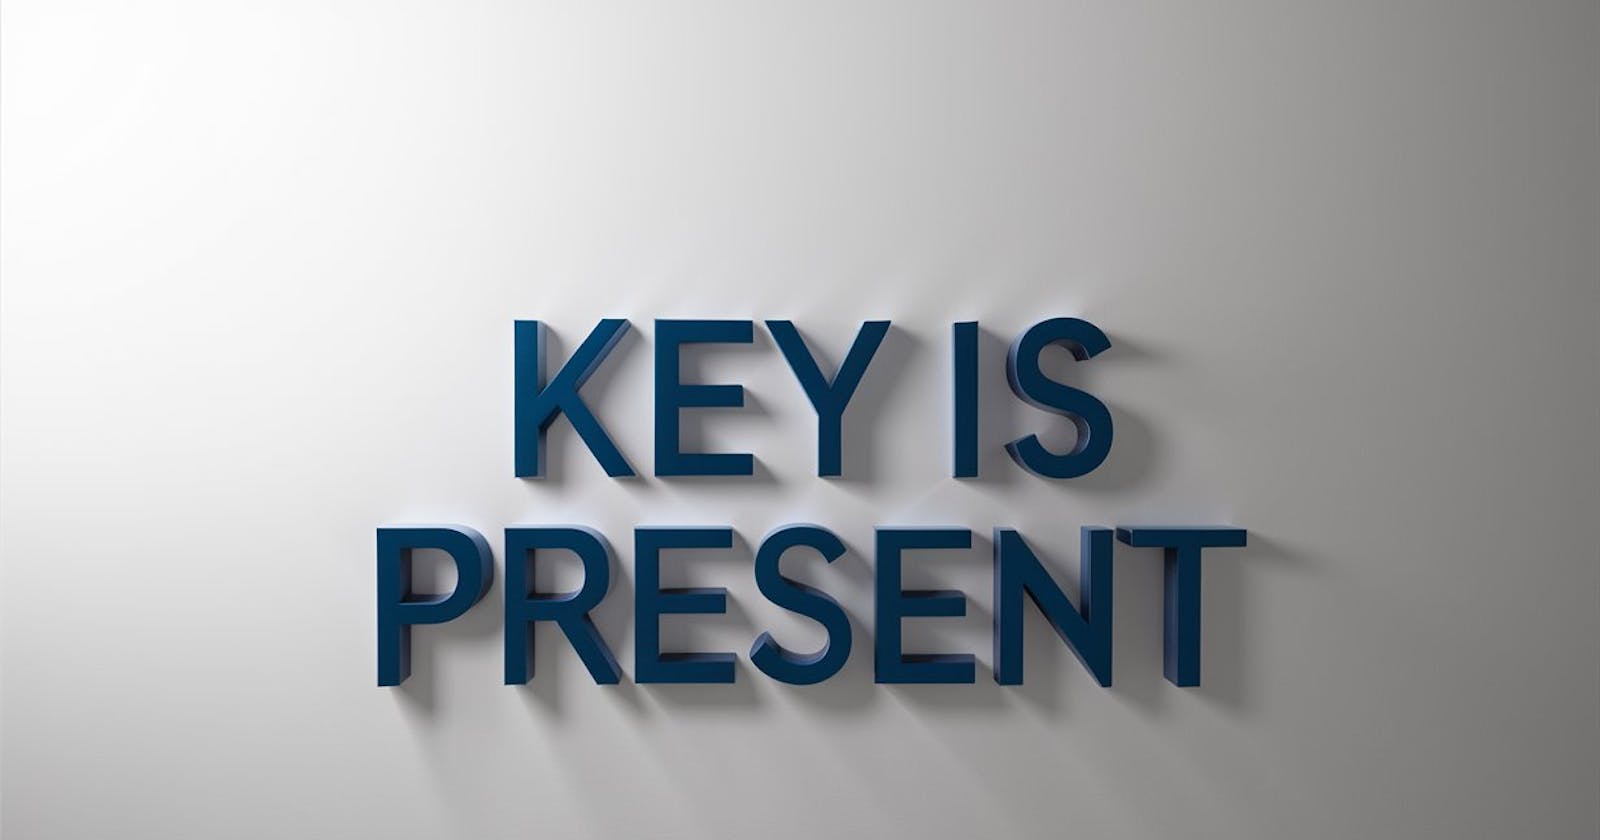 5 Ways to Determine if a Key is Present in a Dictionary